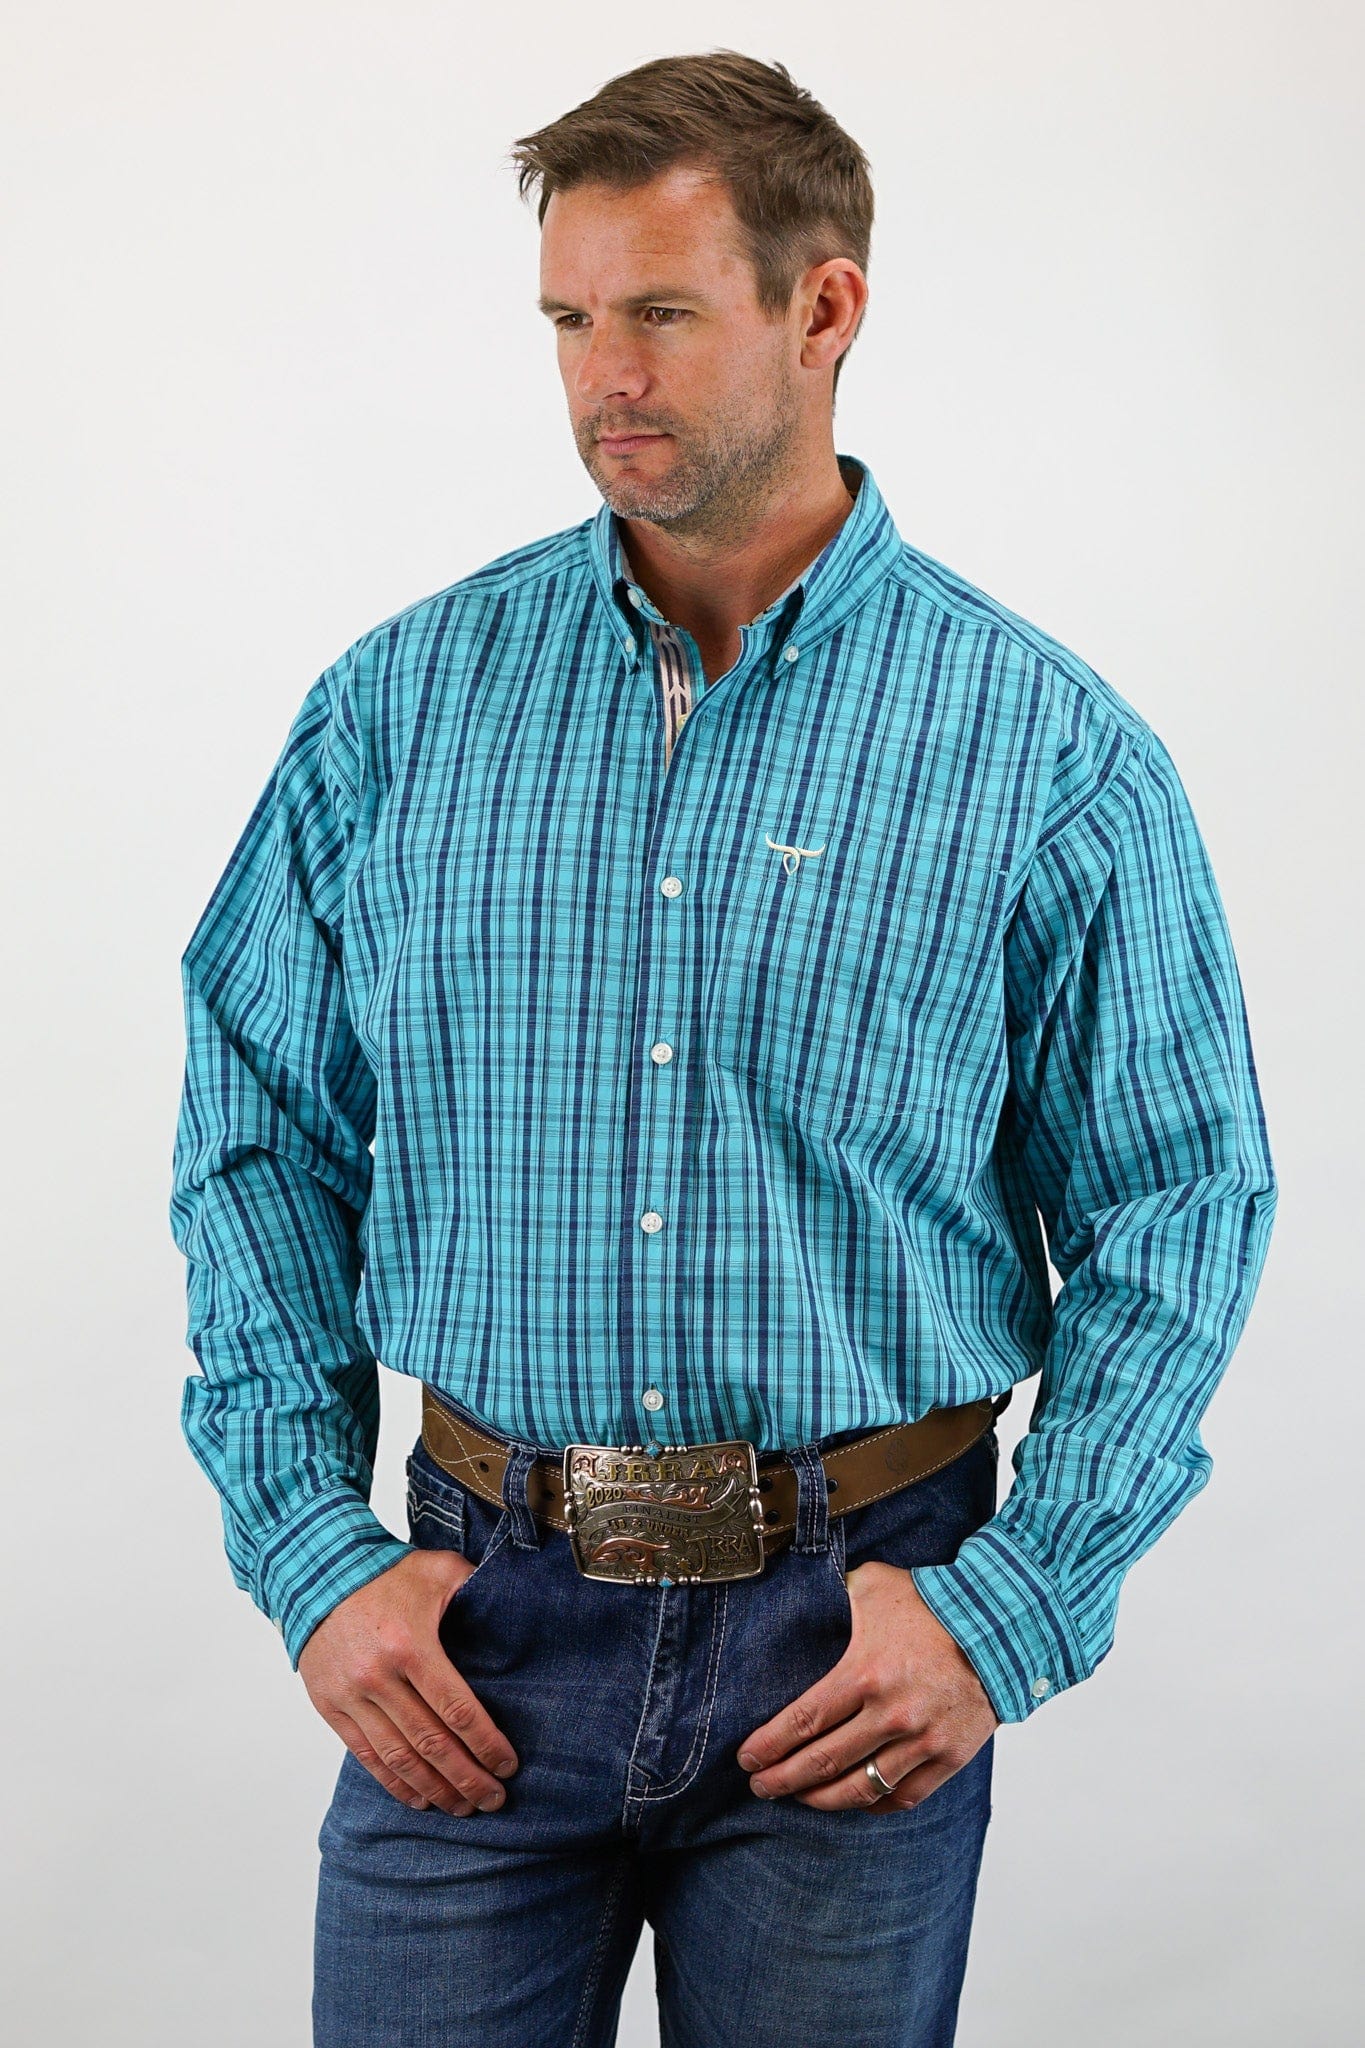 Drover Cowboy Threads Shirts Signature Series - Longhorn - Turquoise and Blue Plaid, Option Cuff, Classic Fit Shirt